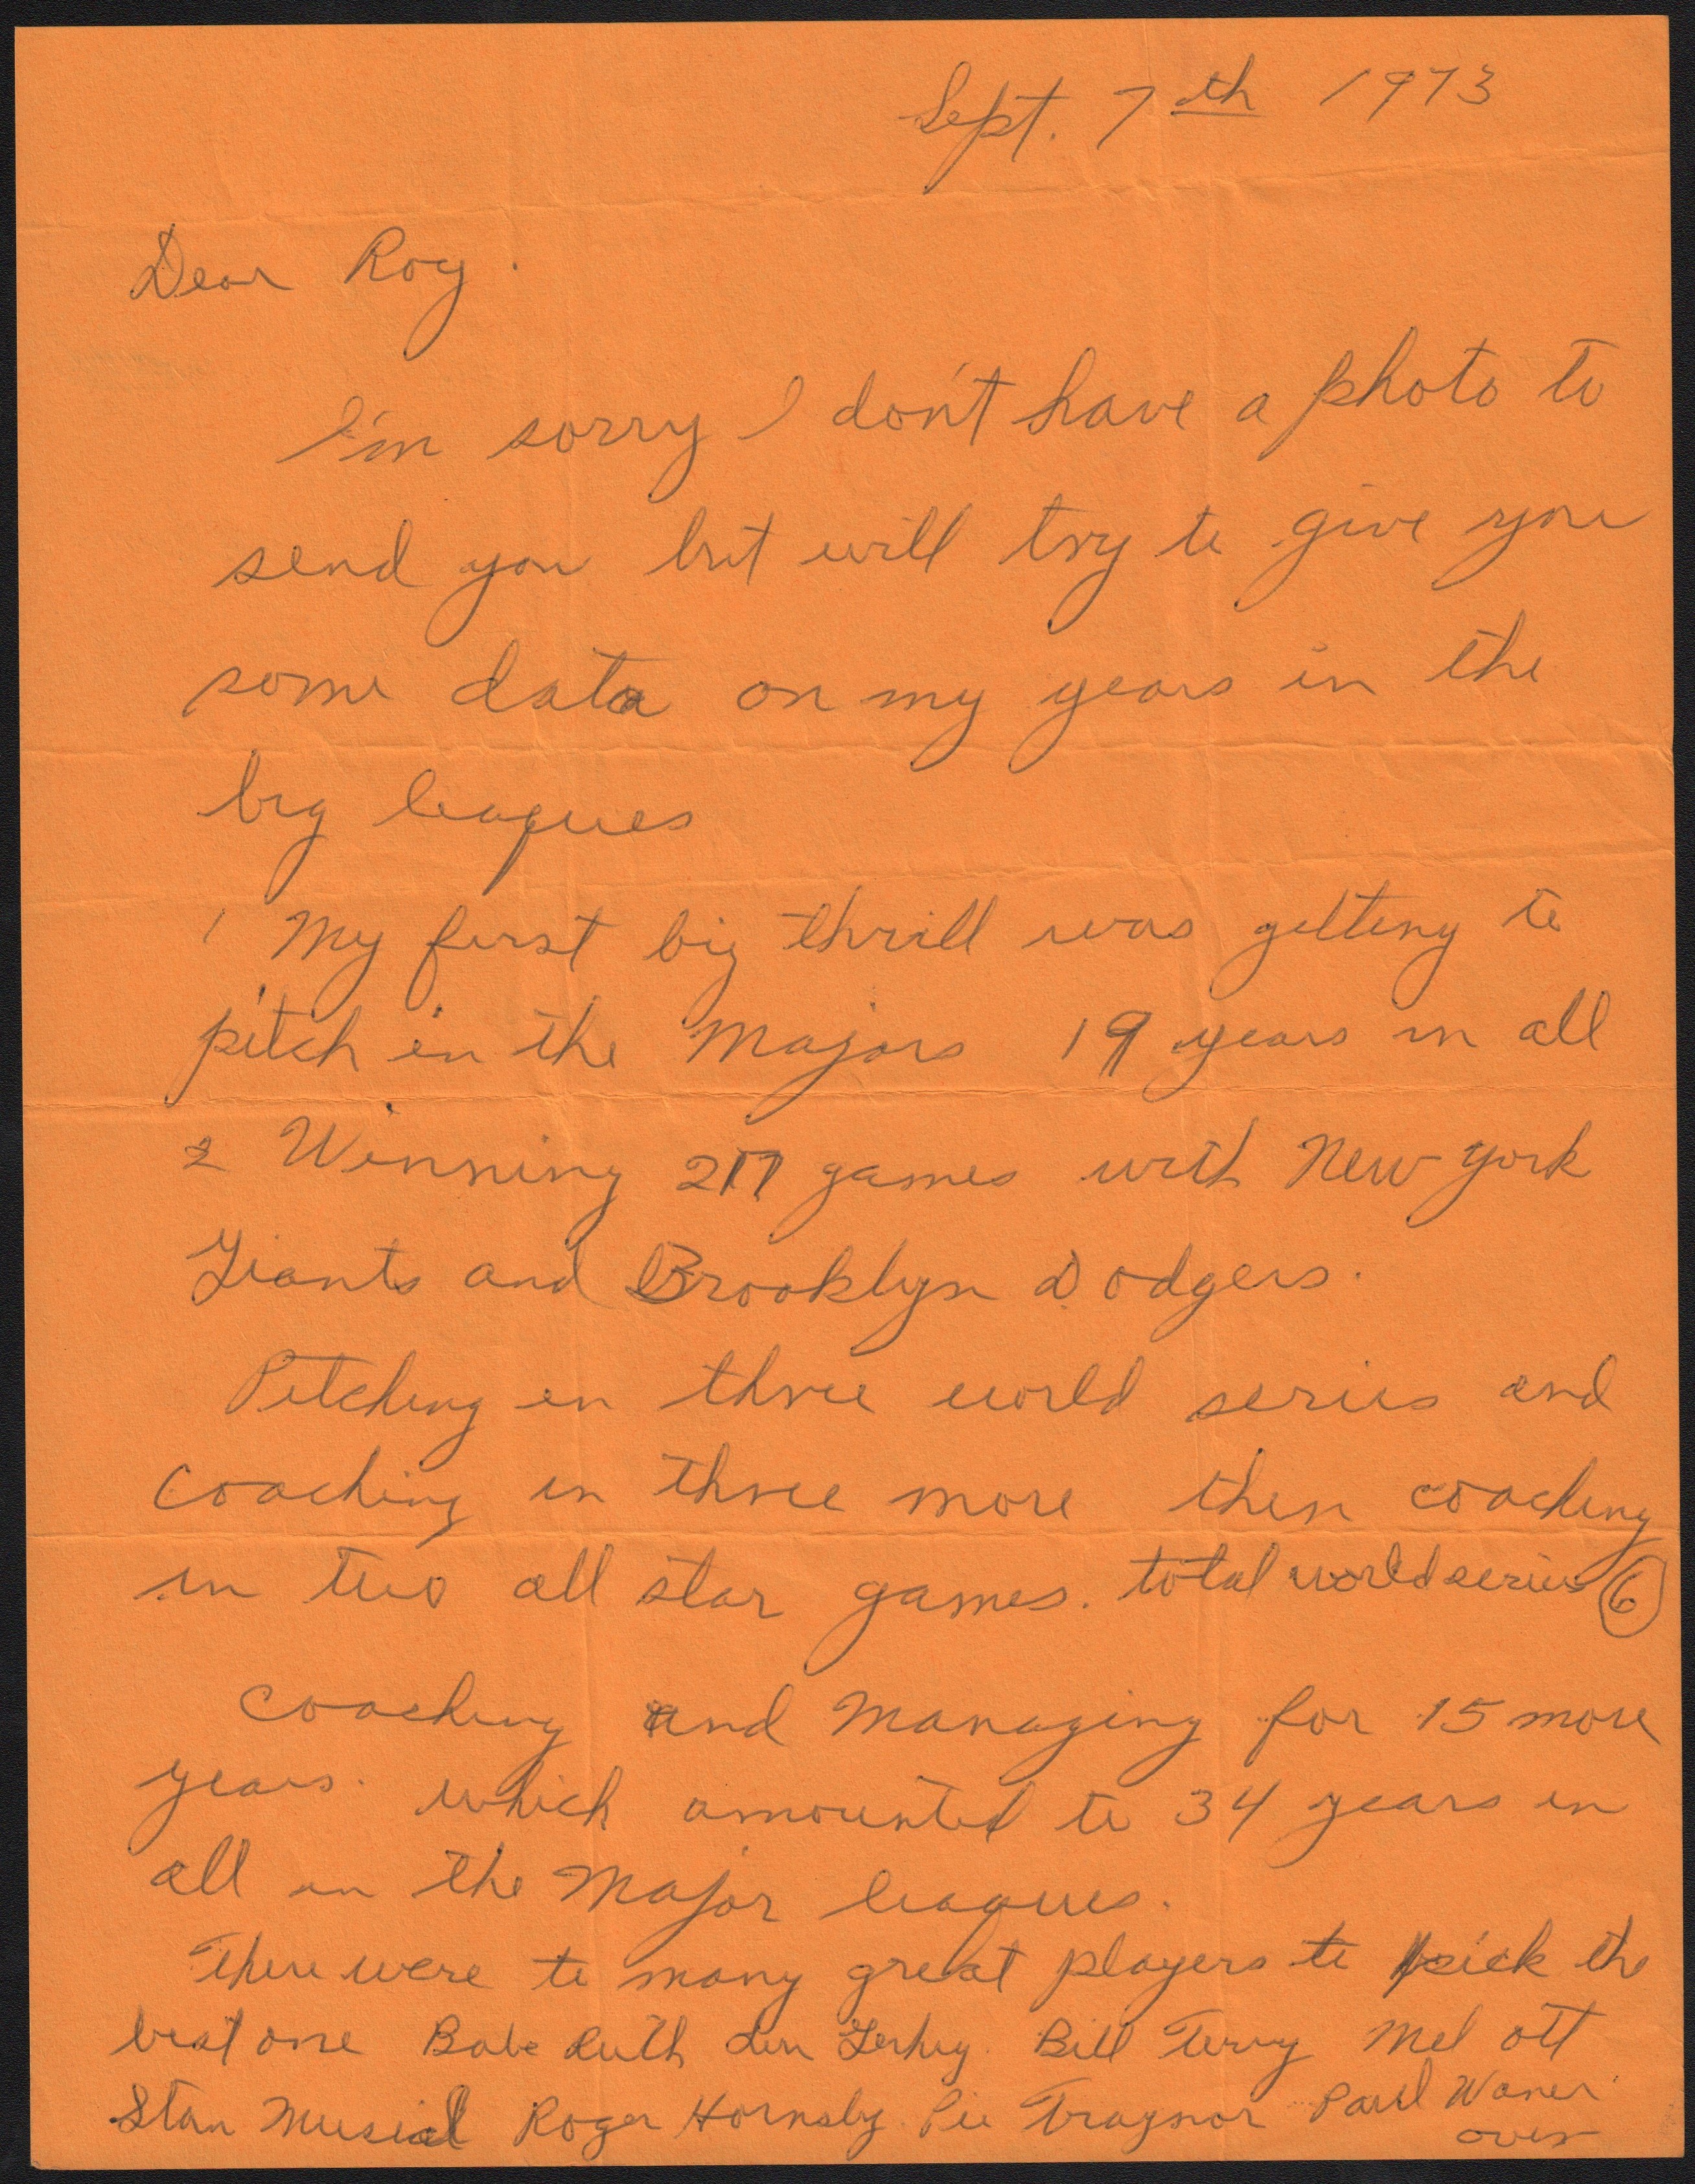 - 1973 Fred Fitzsimmons Handwritten Letter with Babe Ruth Content